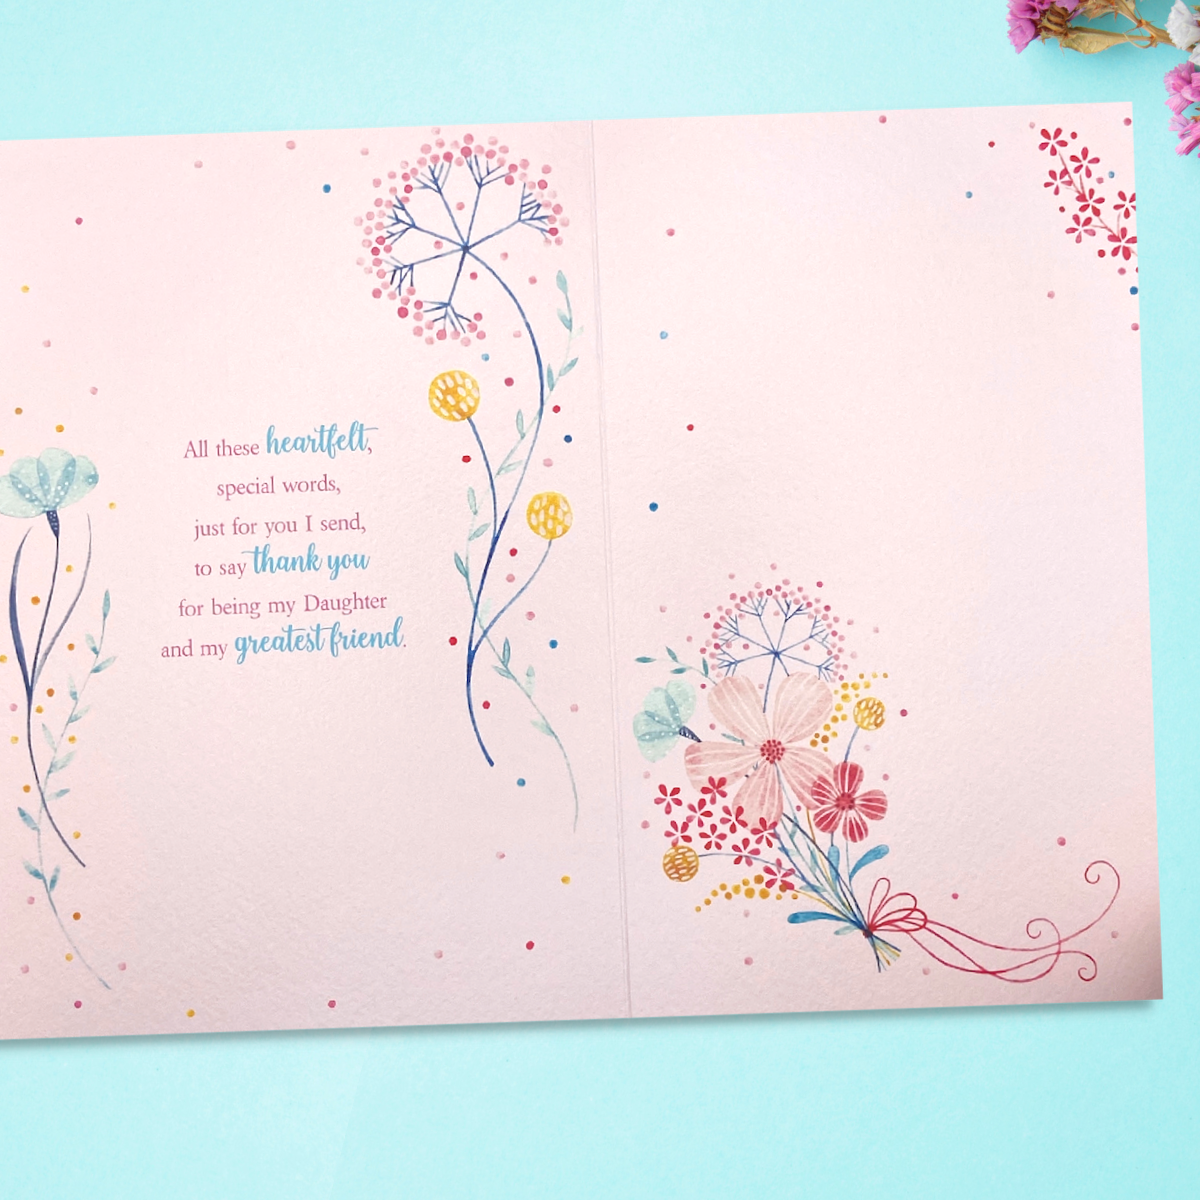 Two final pages with more floral designs and verse